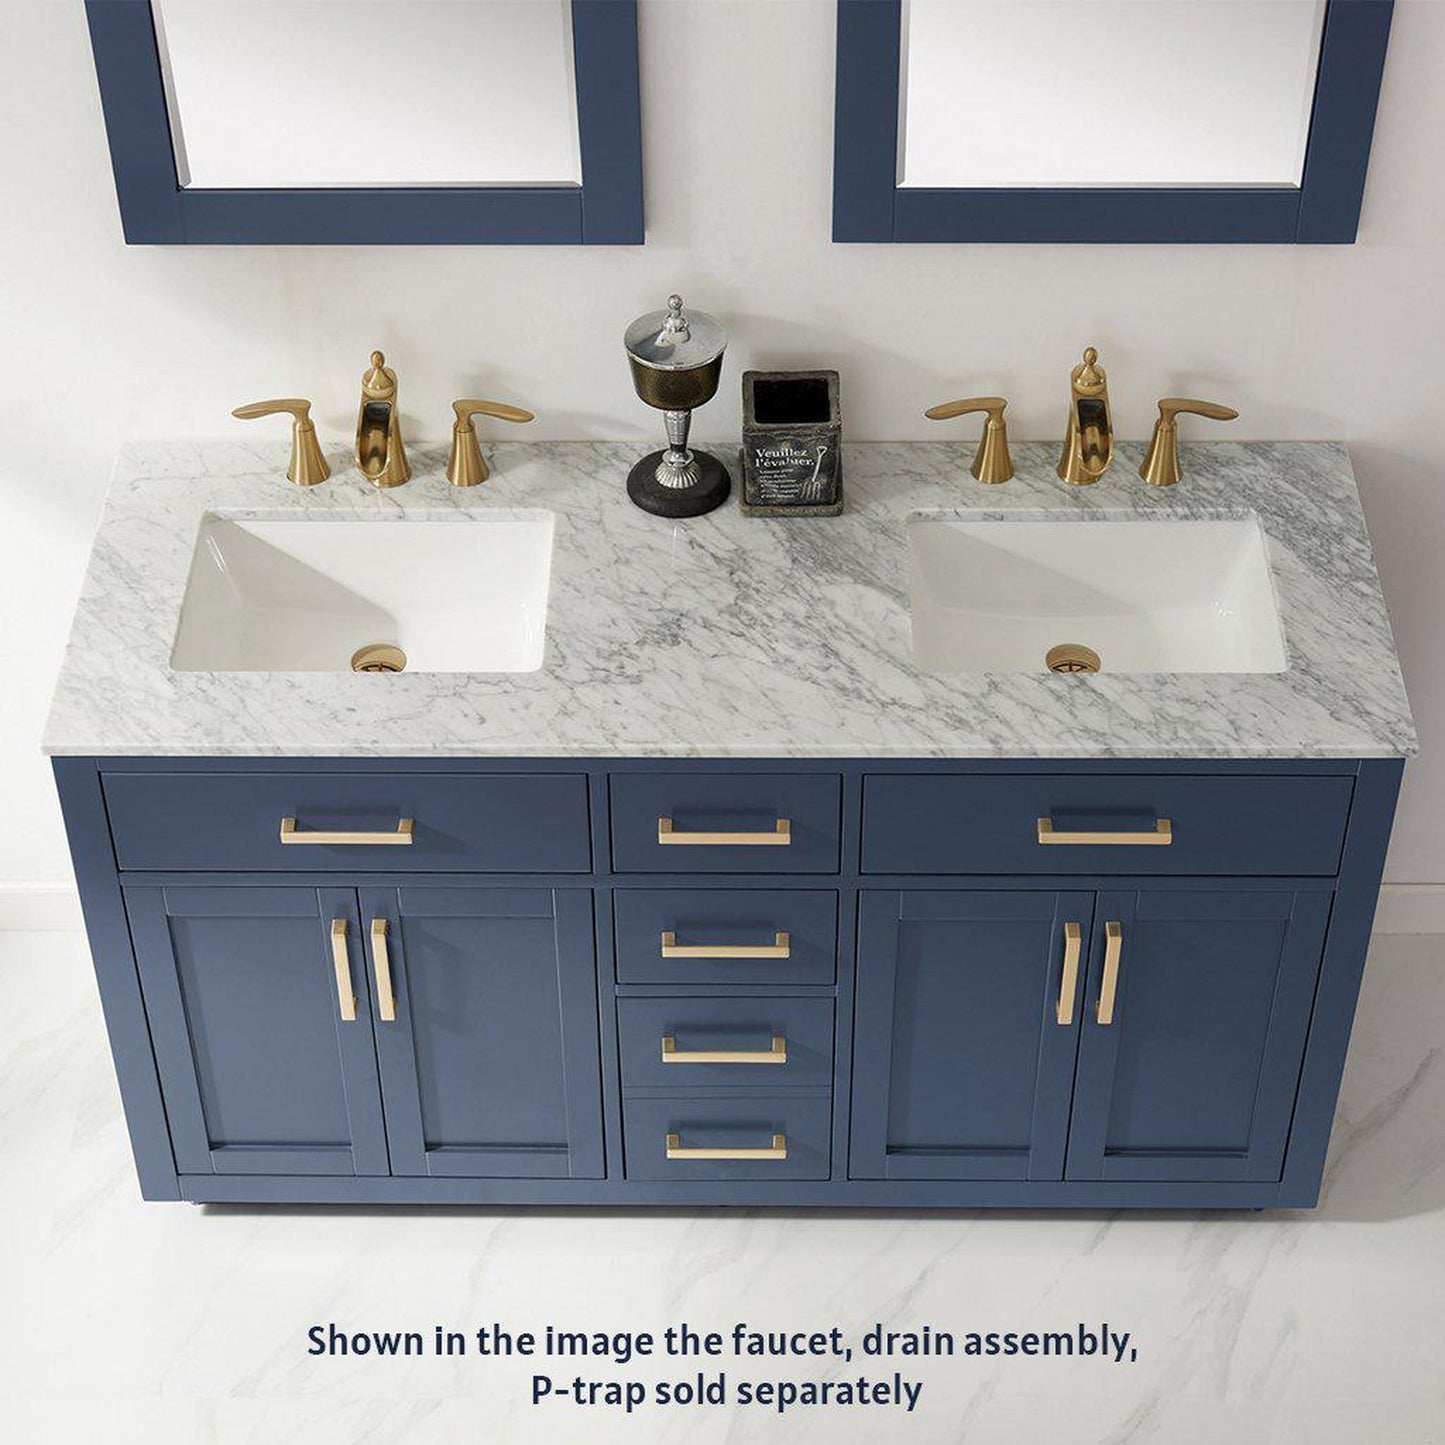 Altair Ivy 60" Double Royal Blue Freestanding Bathroom Vanity Set With Mirror, Natural Carrara White Marble Top, Two Rectangular Undermount Ceramic Sinks, and Overflow